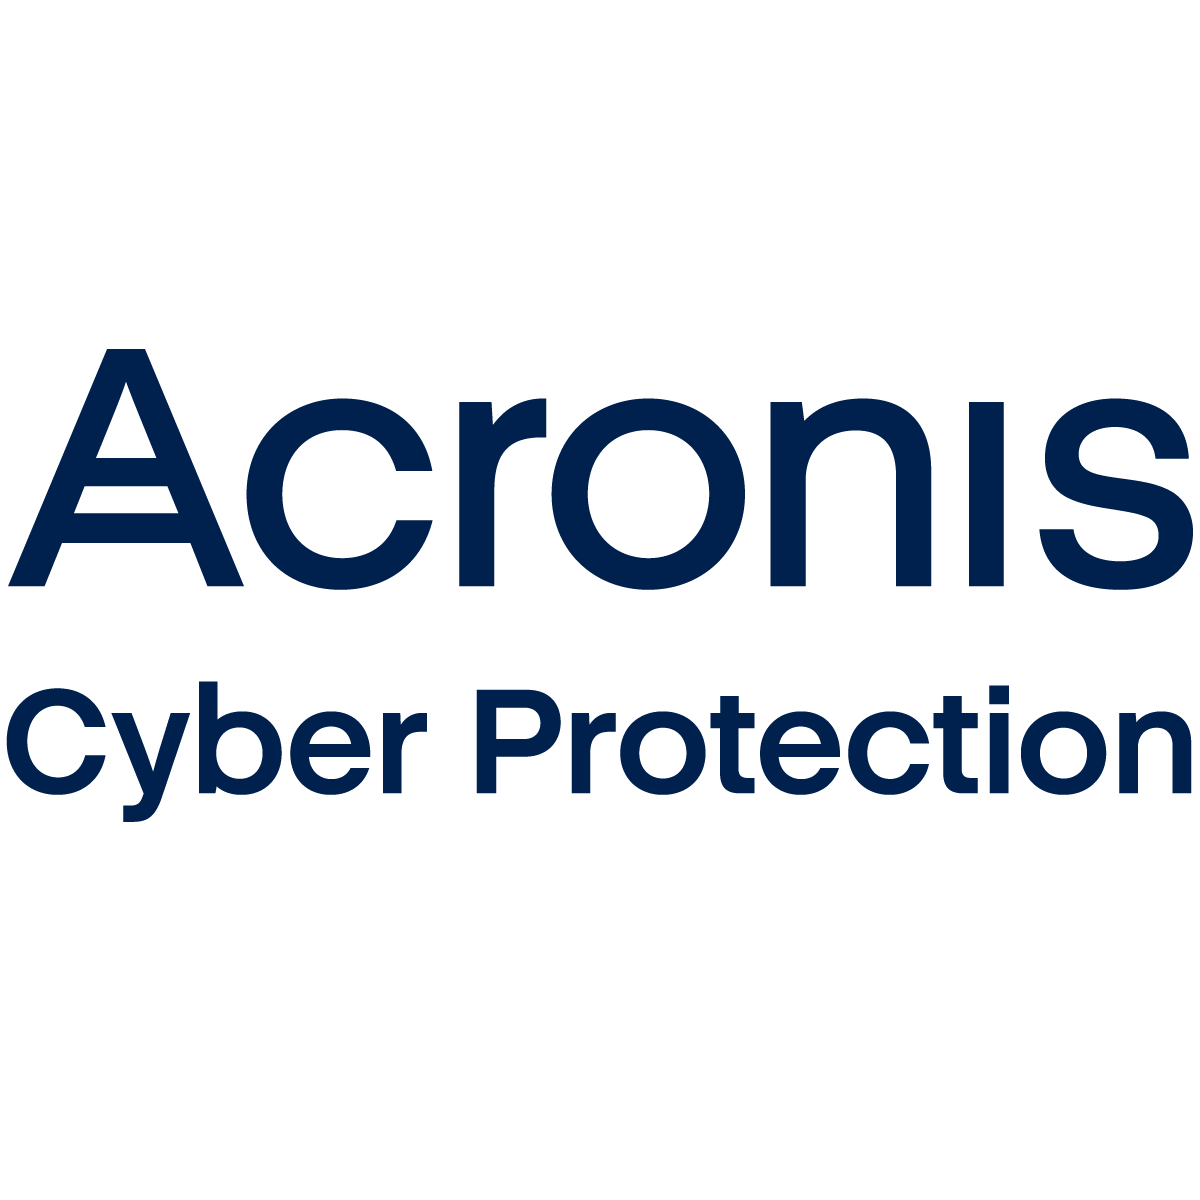 Acronis Cyber Protection